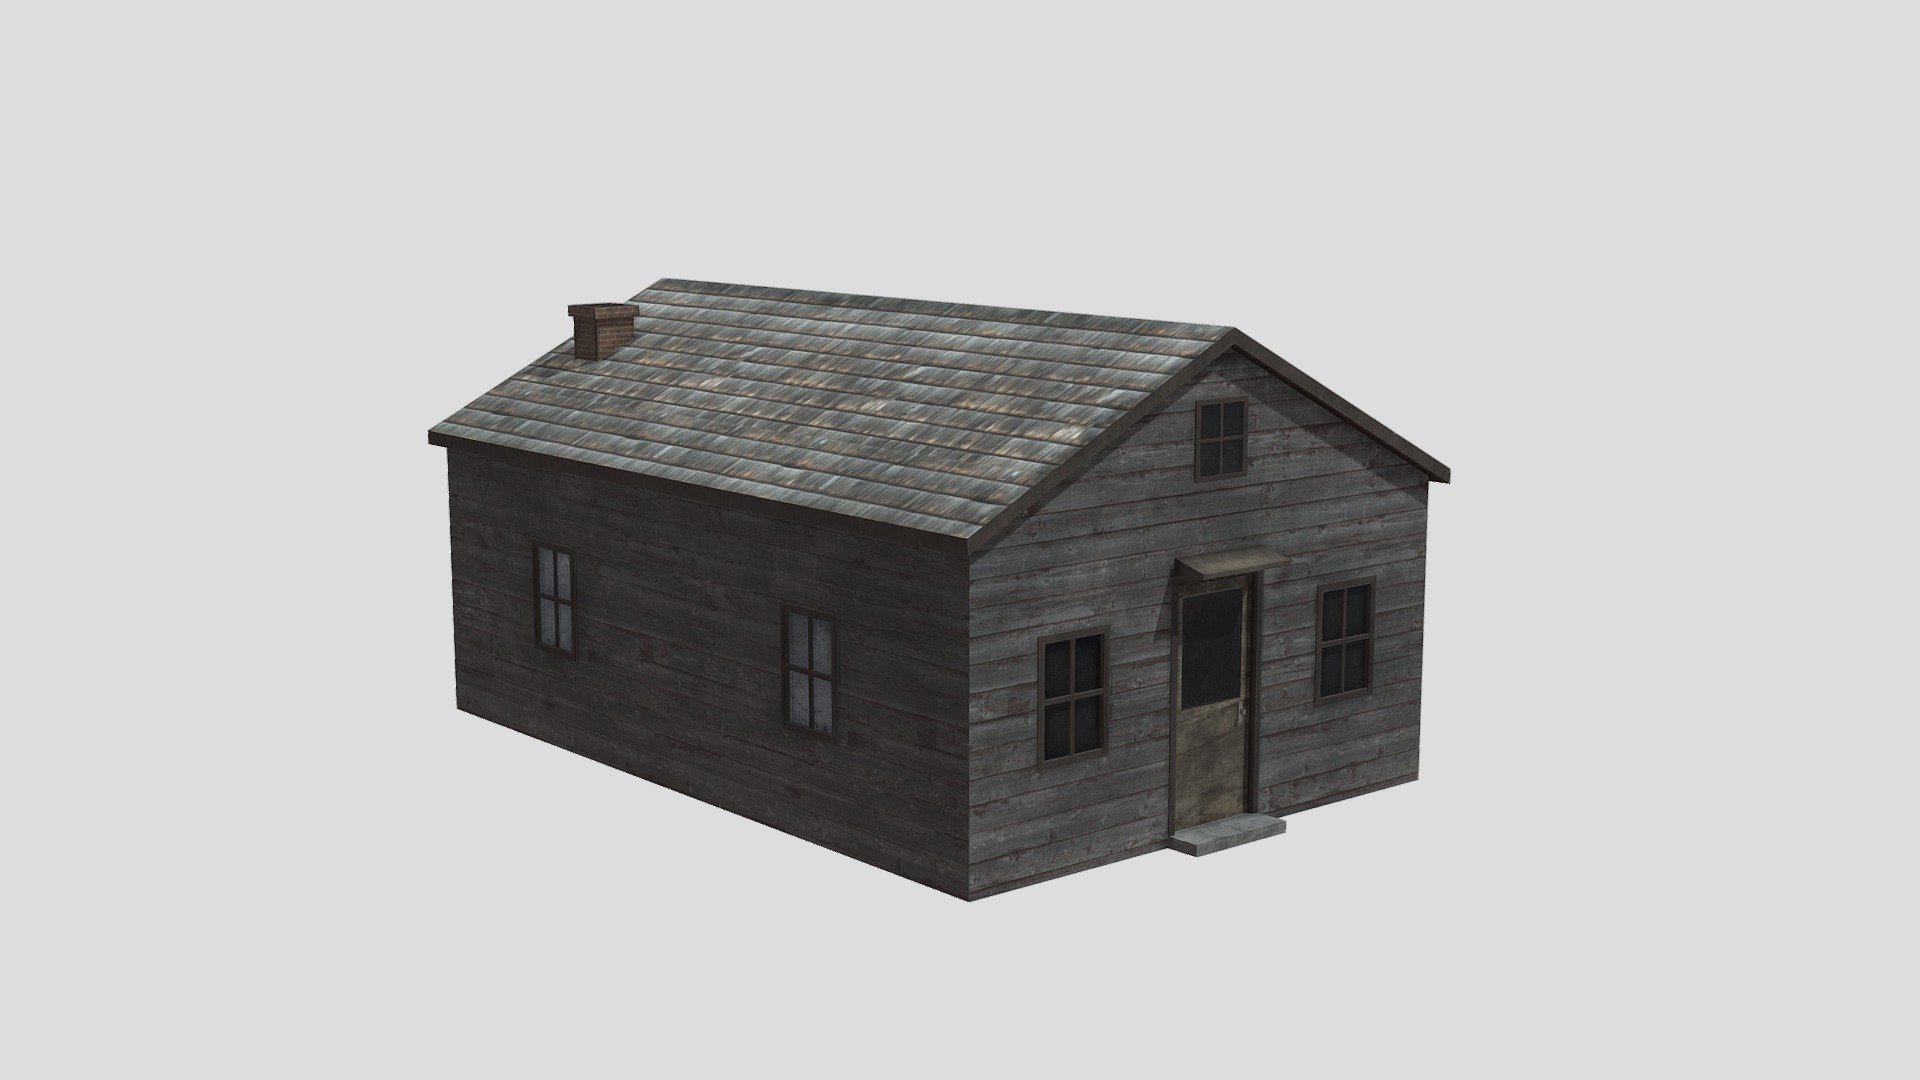 Old Abandoned House

Obj, Fbx, Dae, mtl,Blend and texture (rar) file formats.

All formats tested and working.

Assets are low poly.

Assets are fully textured (PBR), 2048x2048 .png's.

All formats tested and working.

The models are polygonal (verts and tris).

UVMapped, Low-poly 3D model.

For ease of use, objects are named logically (using the English language).

Face orientation is ok.

When importing, selecting, if necessary, you can change the size of the model.

The package includes texture and uv mapping.

Basecolor Map, Metallic Map, Roughness Map end Normal Map.

This part, while simple, has been tested with confidence and peace of mind that it can be downloaded 3d model